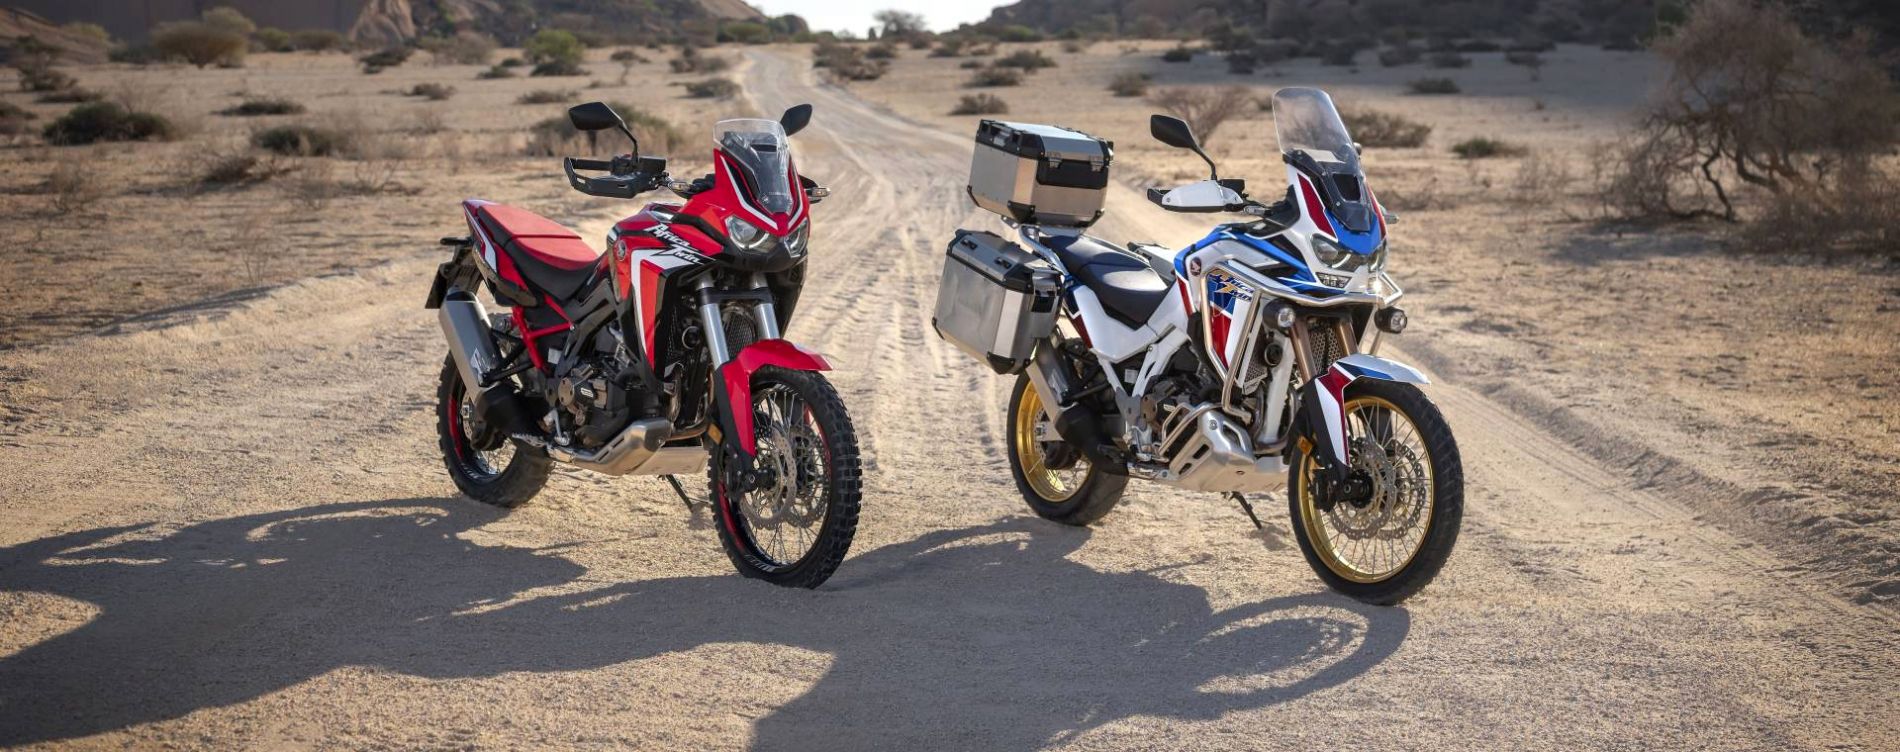 LE NUOVE AFRICA TWIN e AFRICA TWIN ADVENTURE SPORTS 